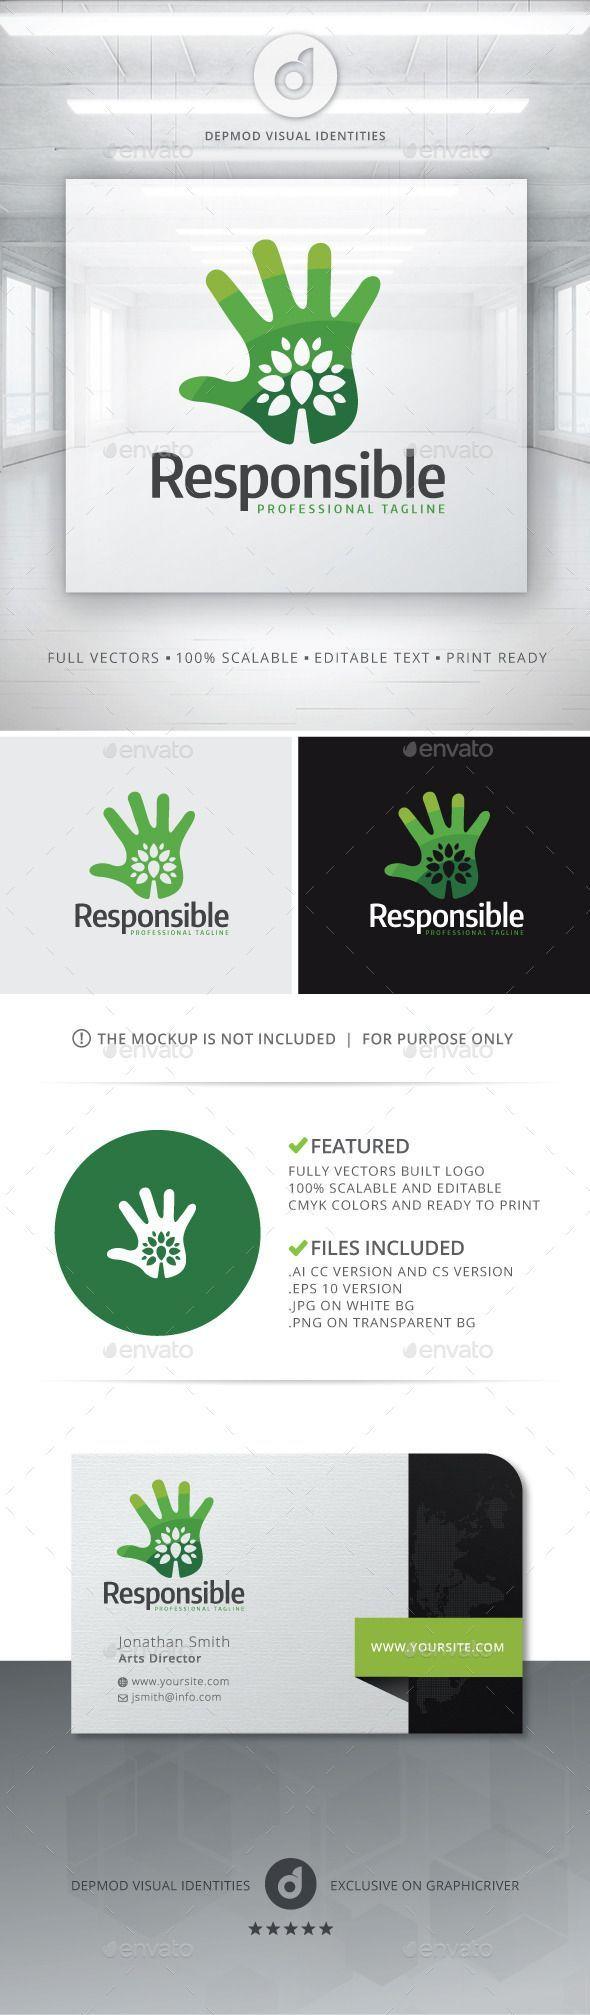 Green White Geometric Logo - Informations for this logo :Logo : Logo of a stylized tree in ...